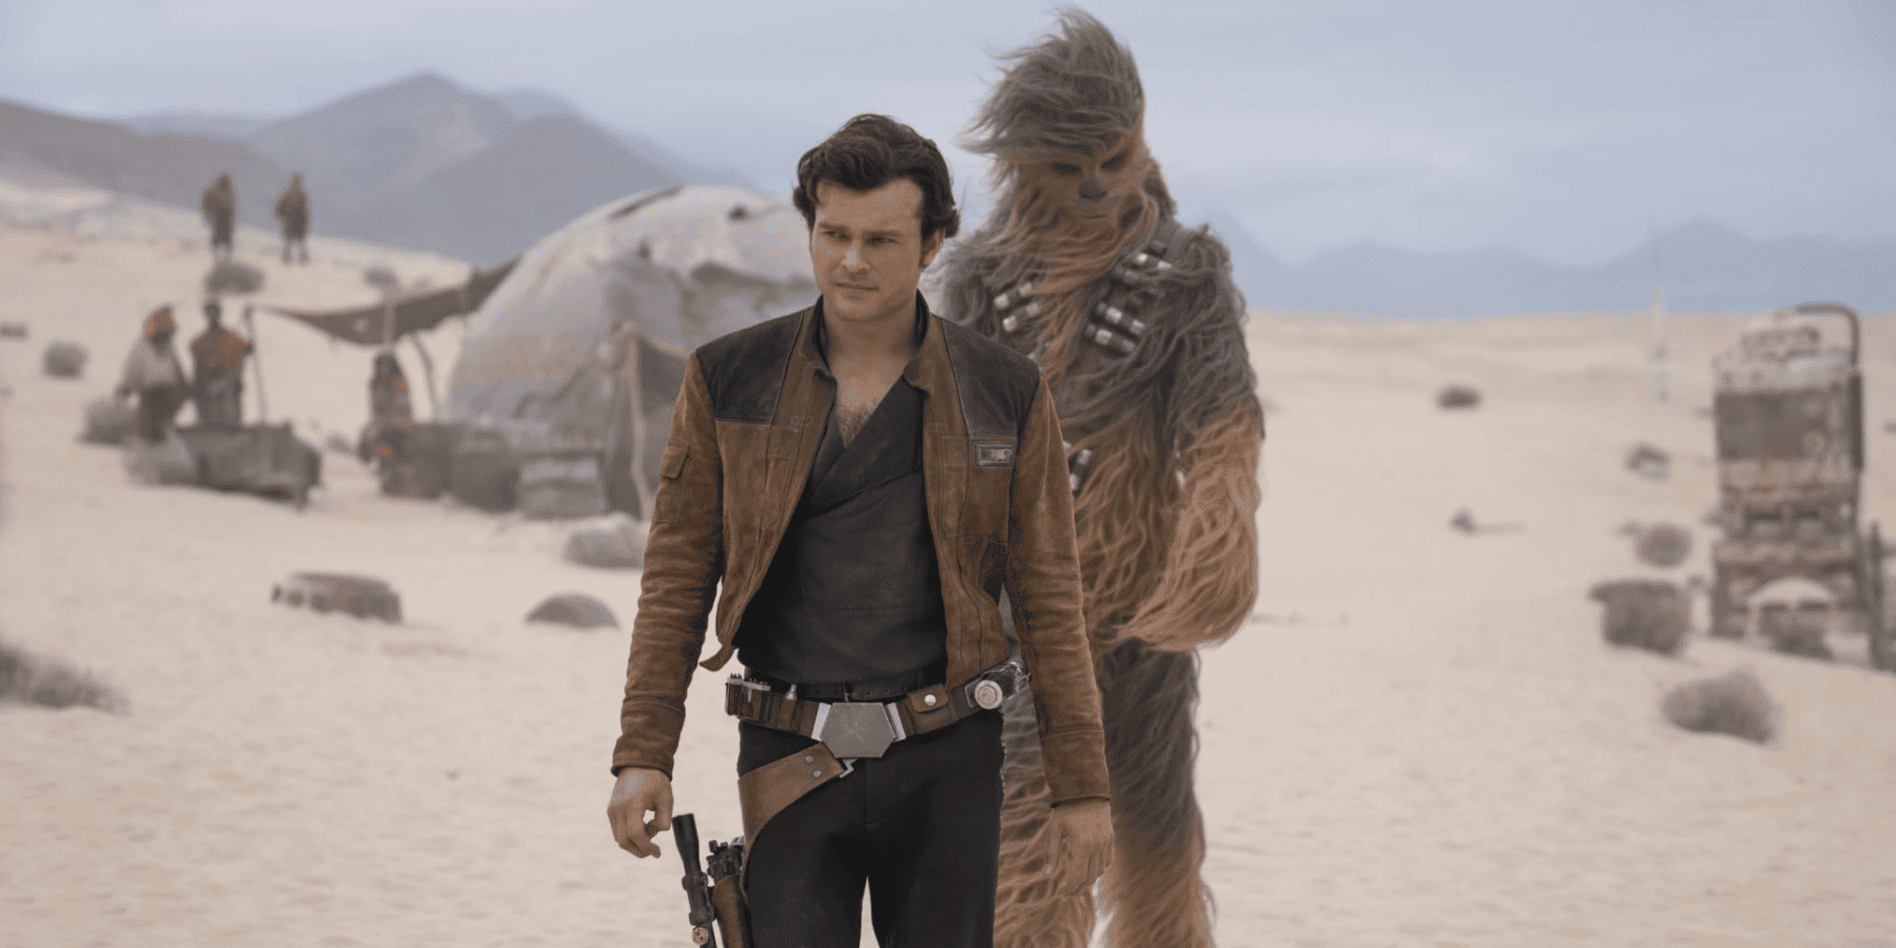 Han Solo and Chewbacca walk in a sandy wasteland in this image from Lucasfilm